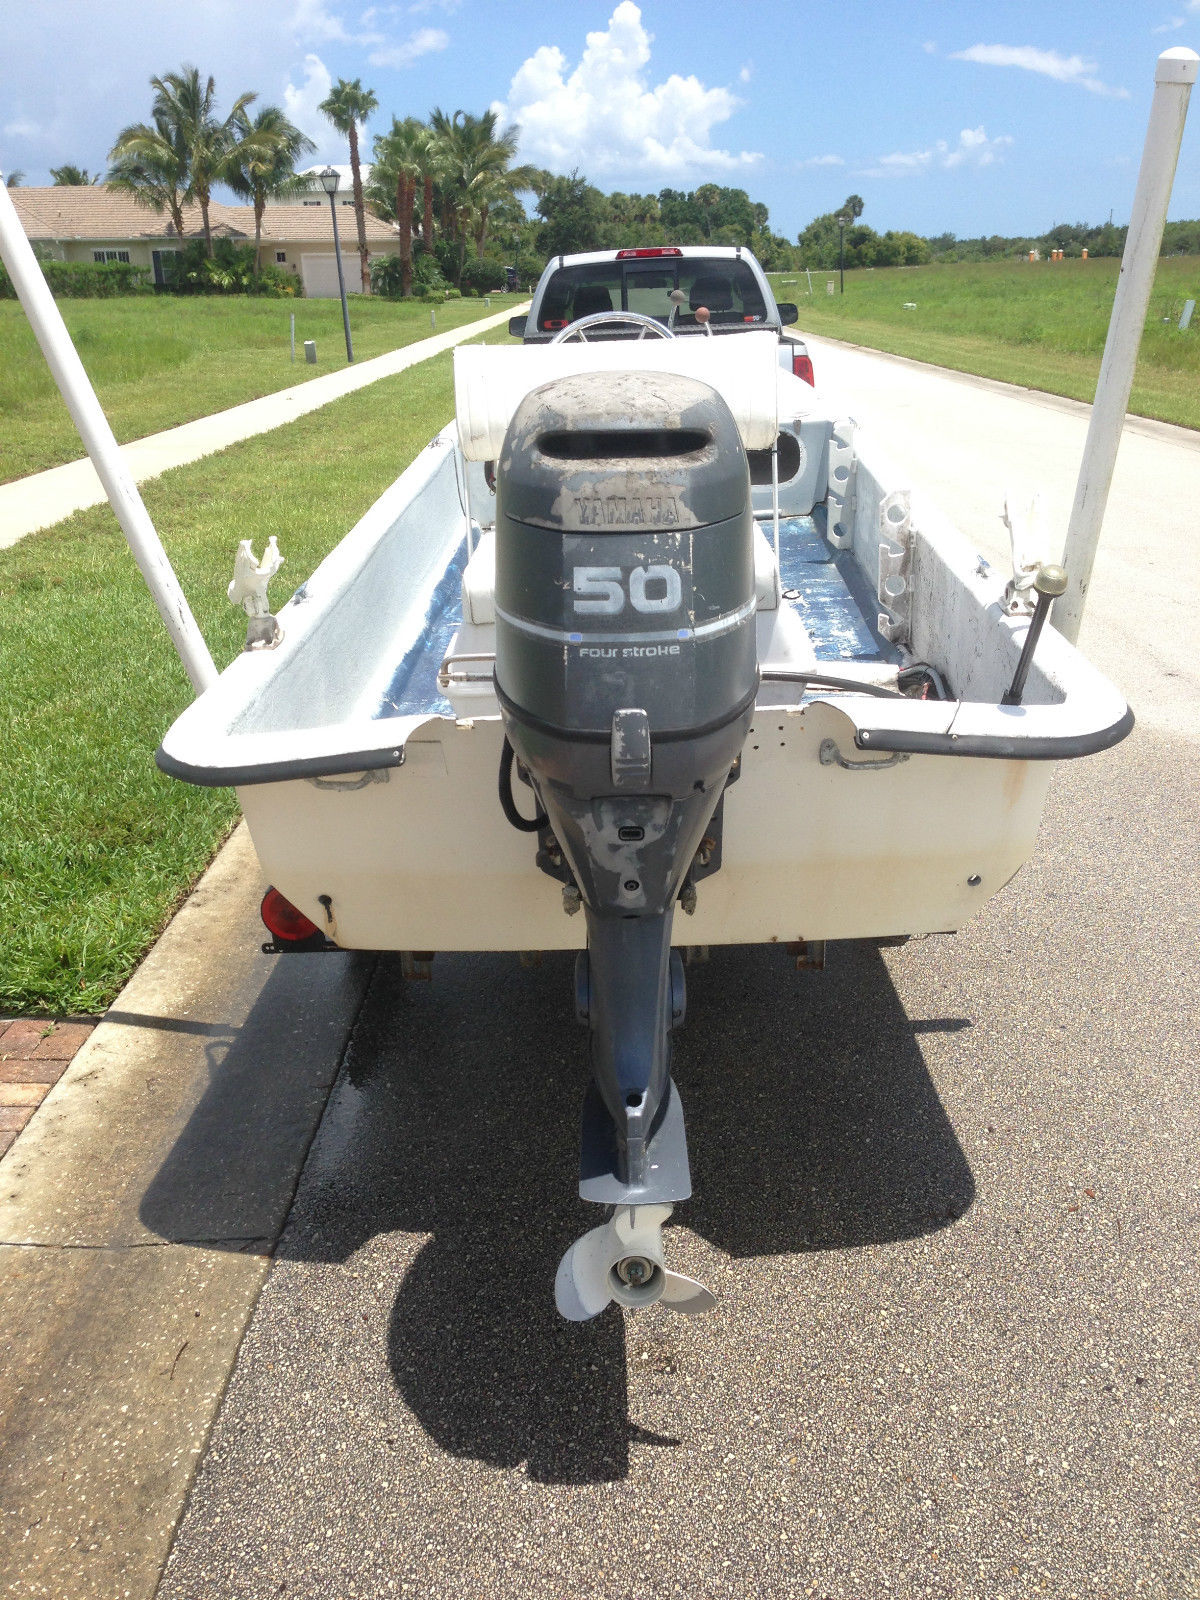 Carolina Skiff J16 2002 for sale for $4,200 - Boats-from 